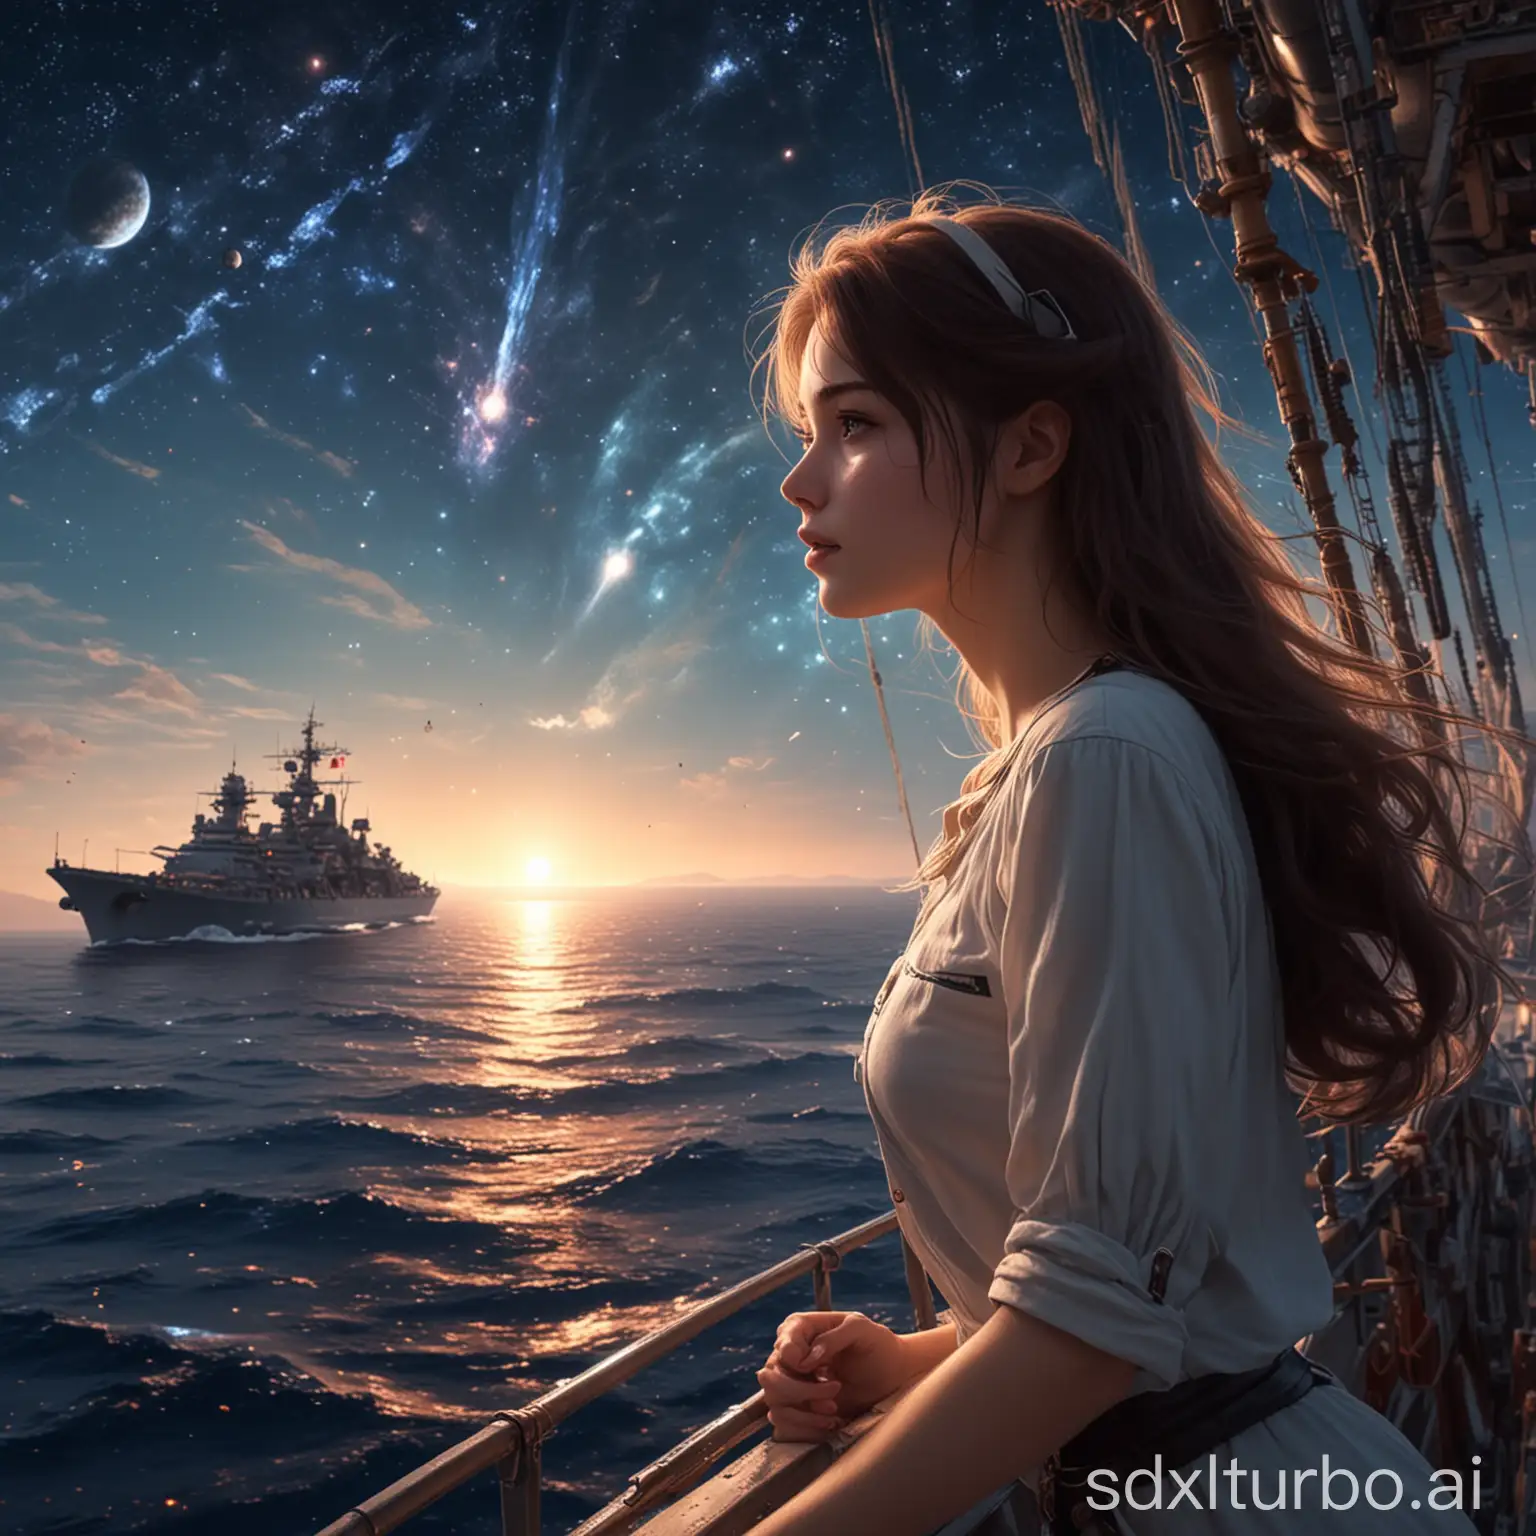 Tranquil-Girl-Amidst-Majestic-Warships-Under-a-Starlit-Sky